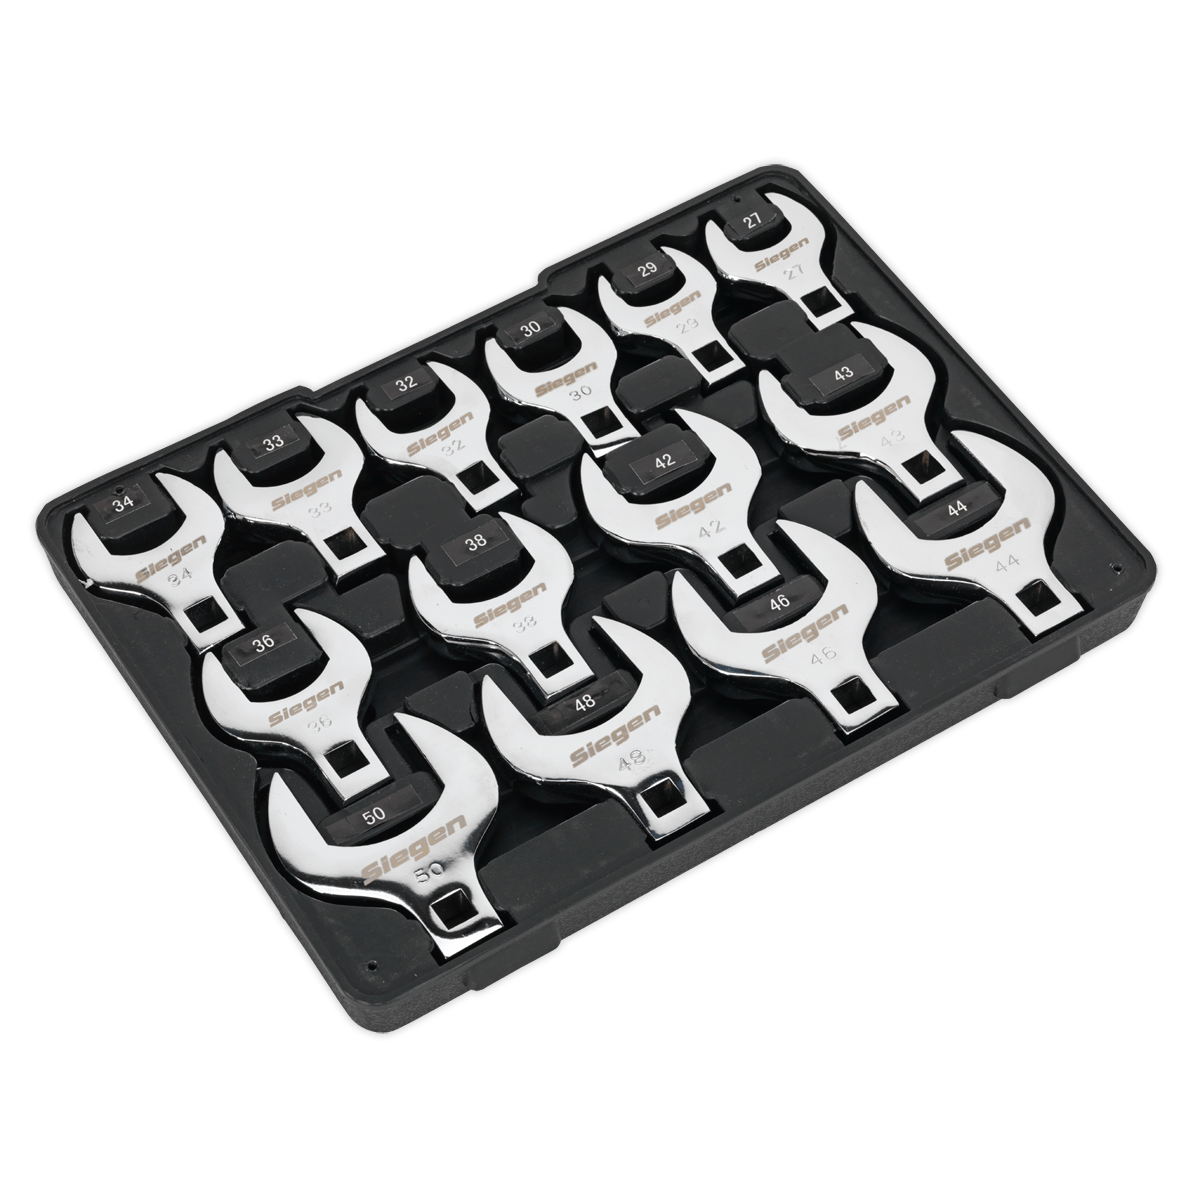 Sealey Crow's Foot Open End Spanner Set 14pc 1/2"Sq Drive Metric S01109